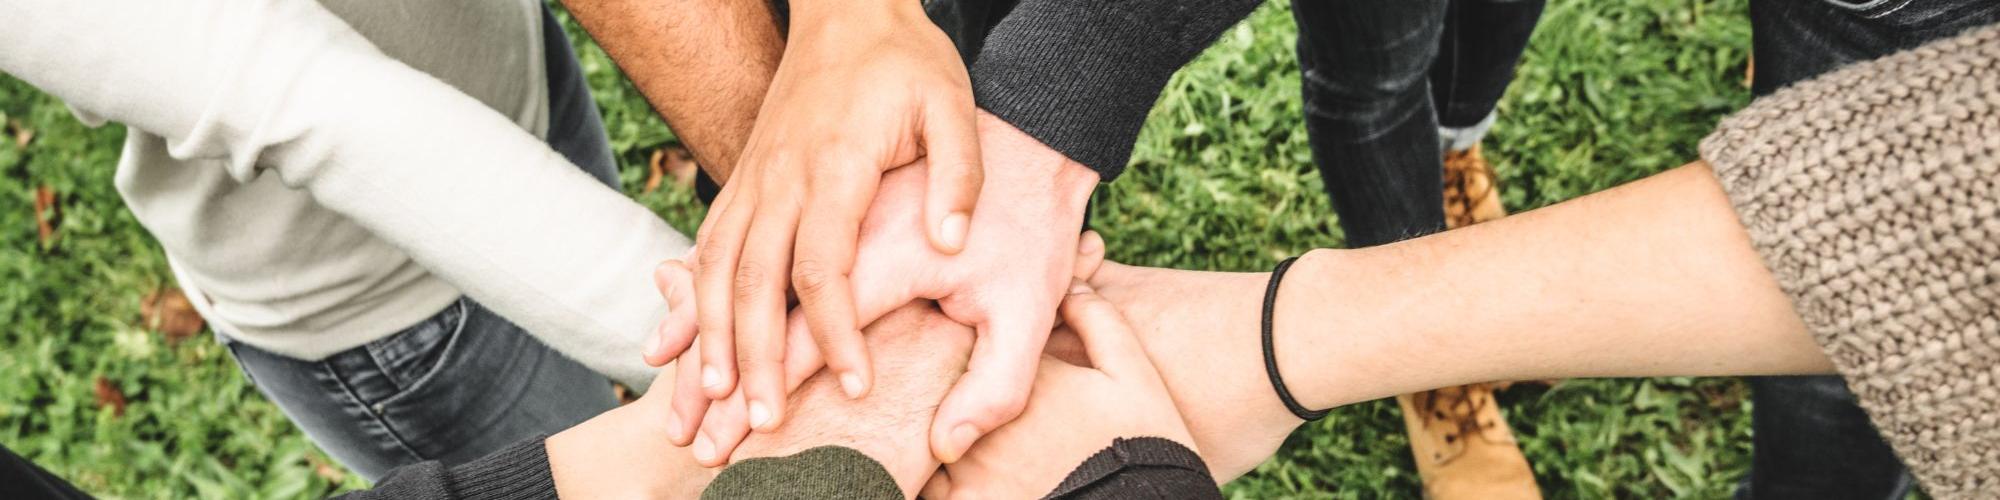 group of people putting their hands in a group huddle